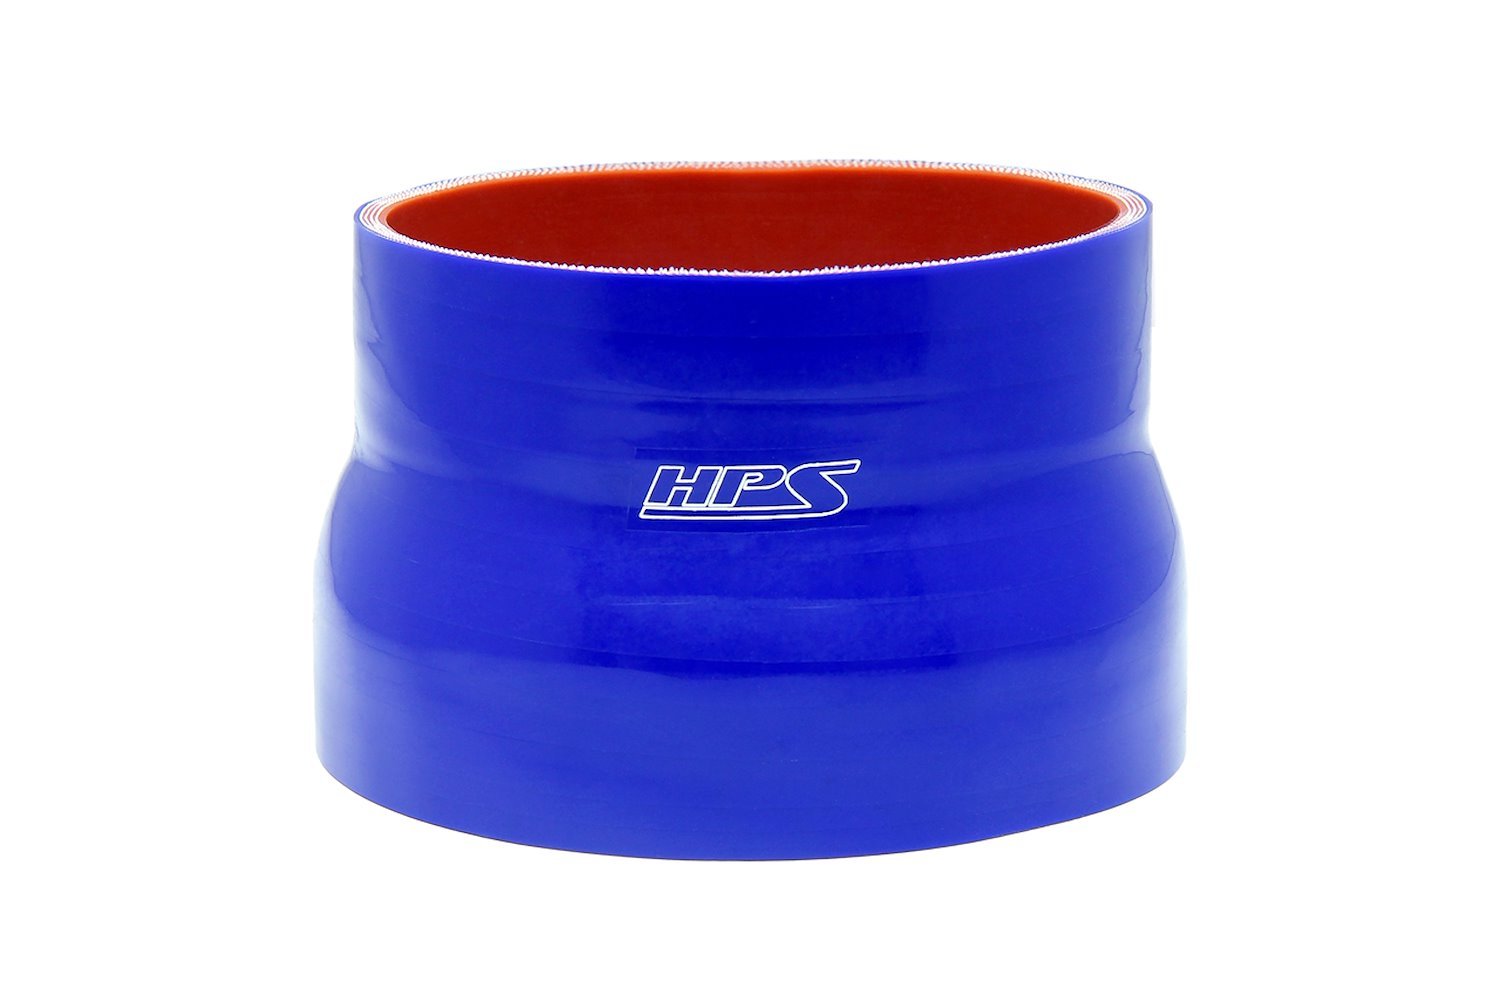 HTSR-400-500-L4-BLUE Silicone Reducer Hose, High-Temp 4-Ply Reinforced, 4 in. - 5 in. ID, 4 in. Long, Blue